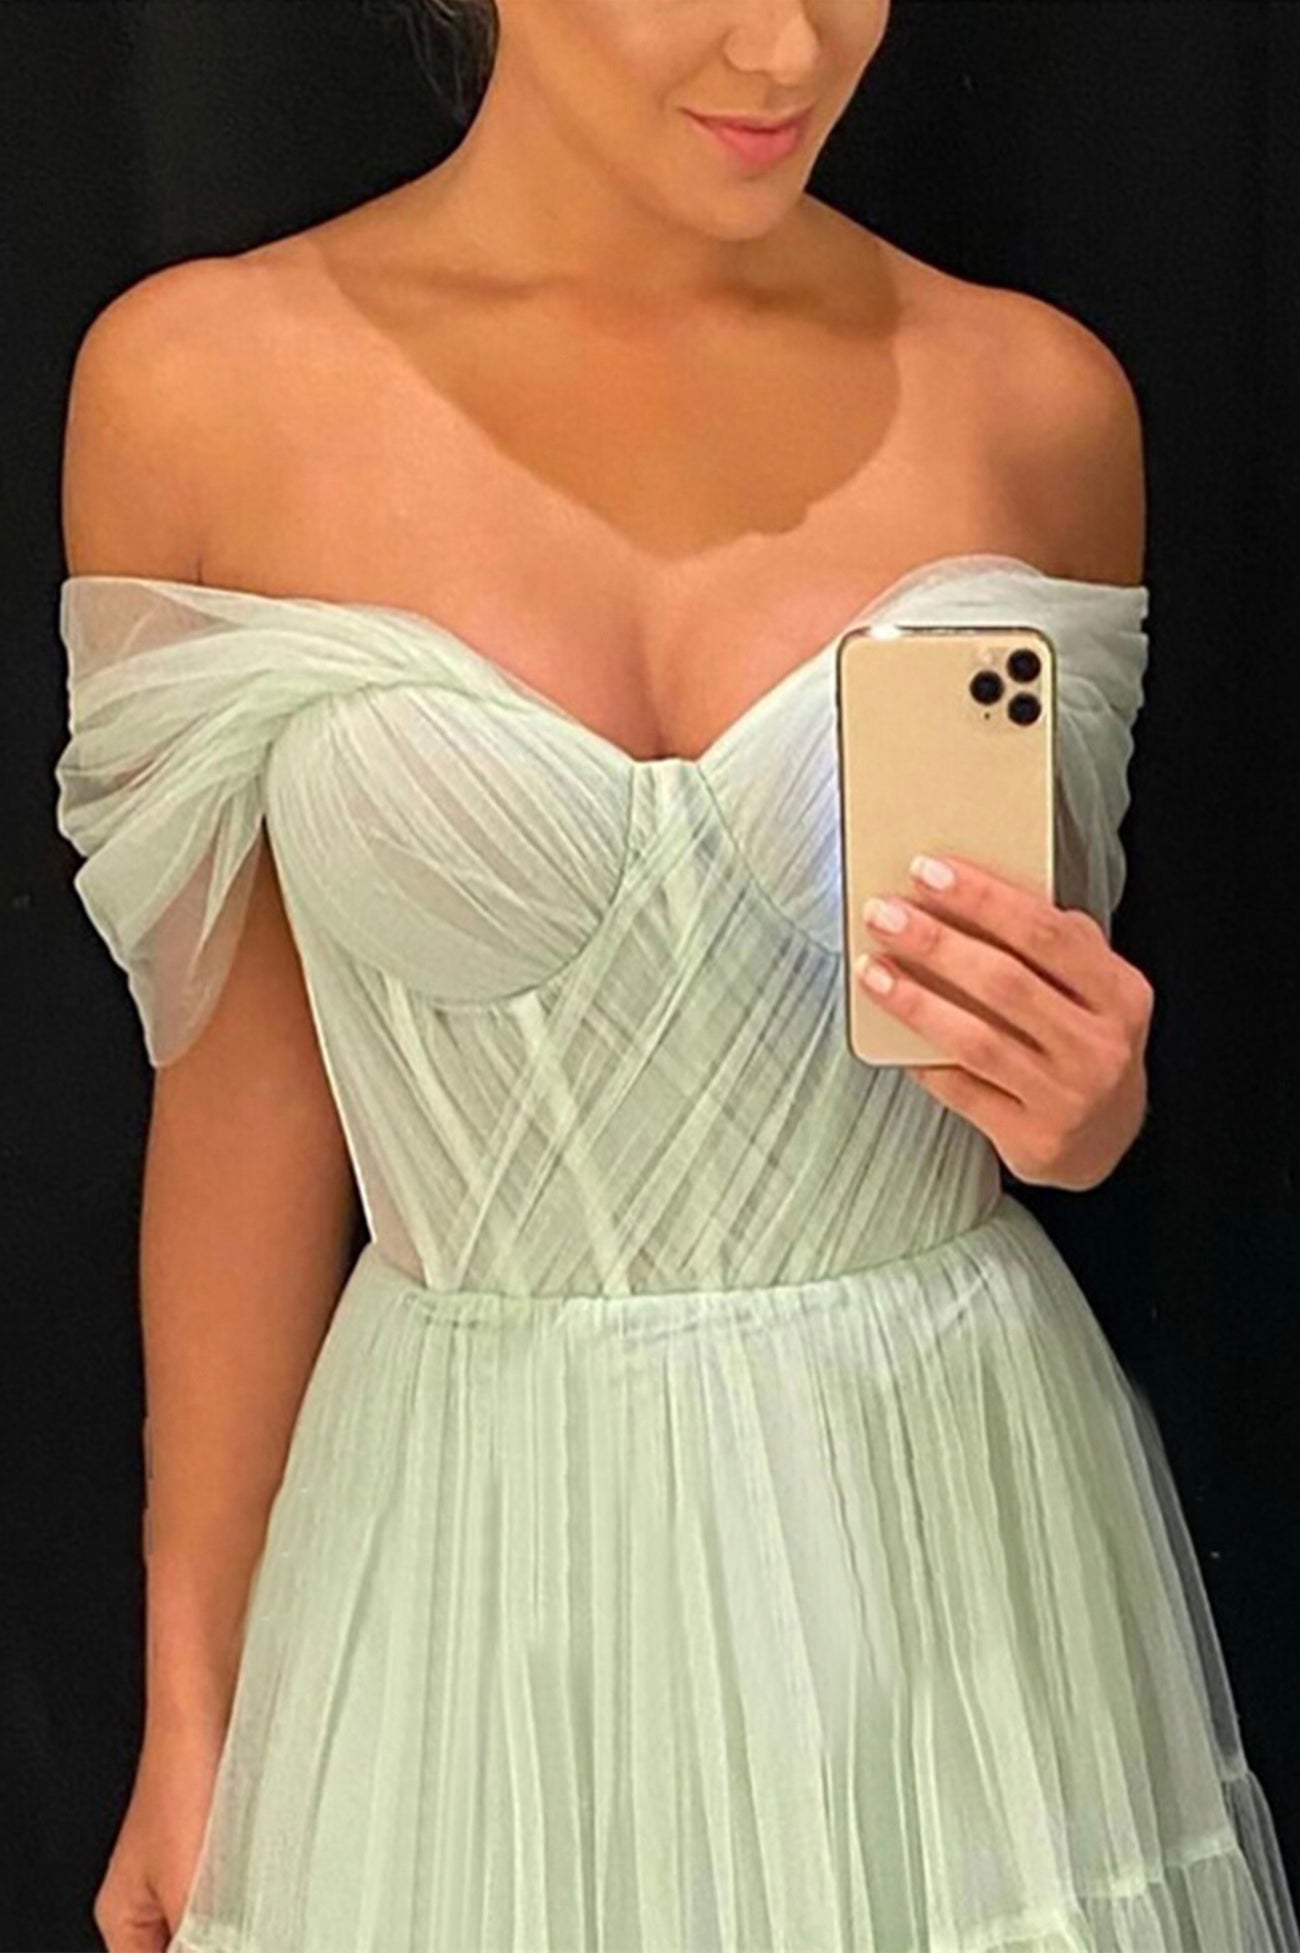 Green Tulle Long A-Line Prom Dress, Off the Shoulder Evening Party Dress